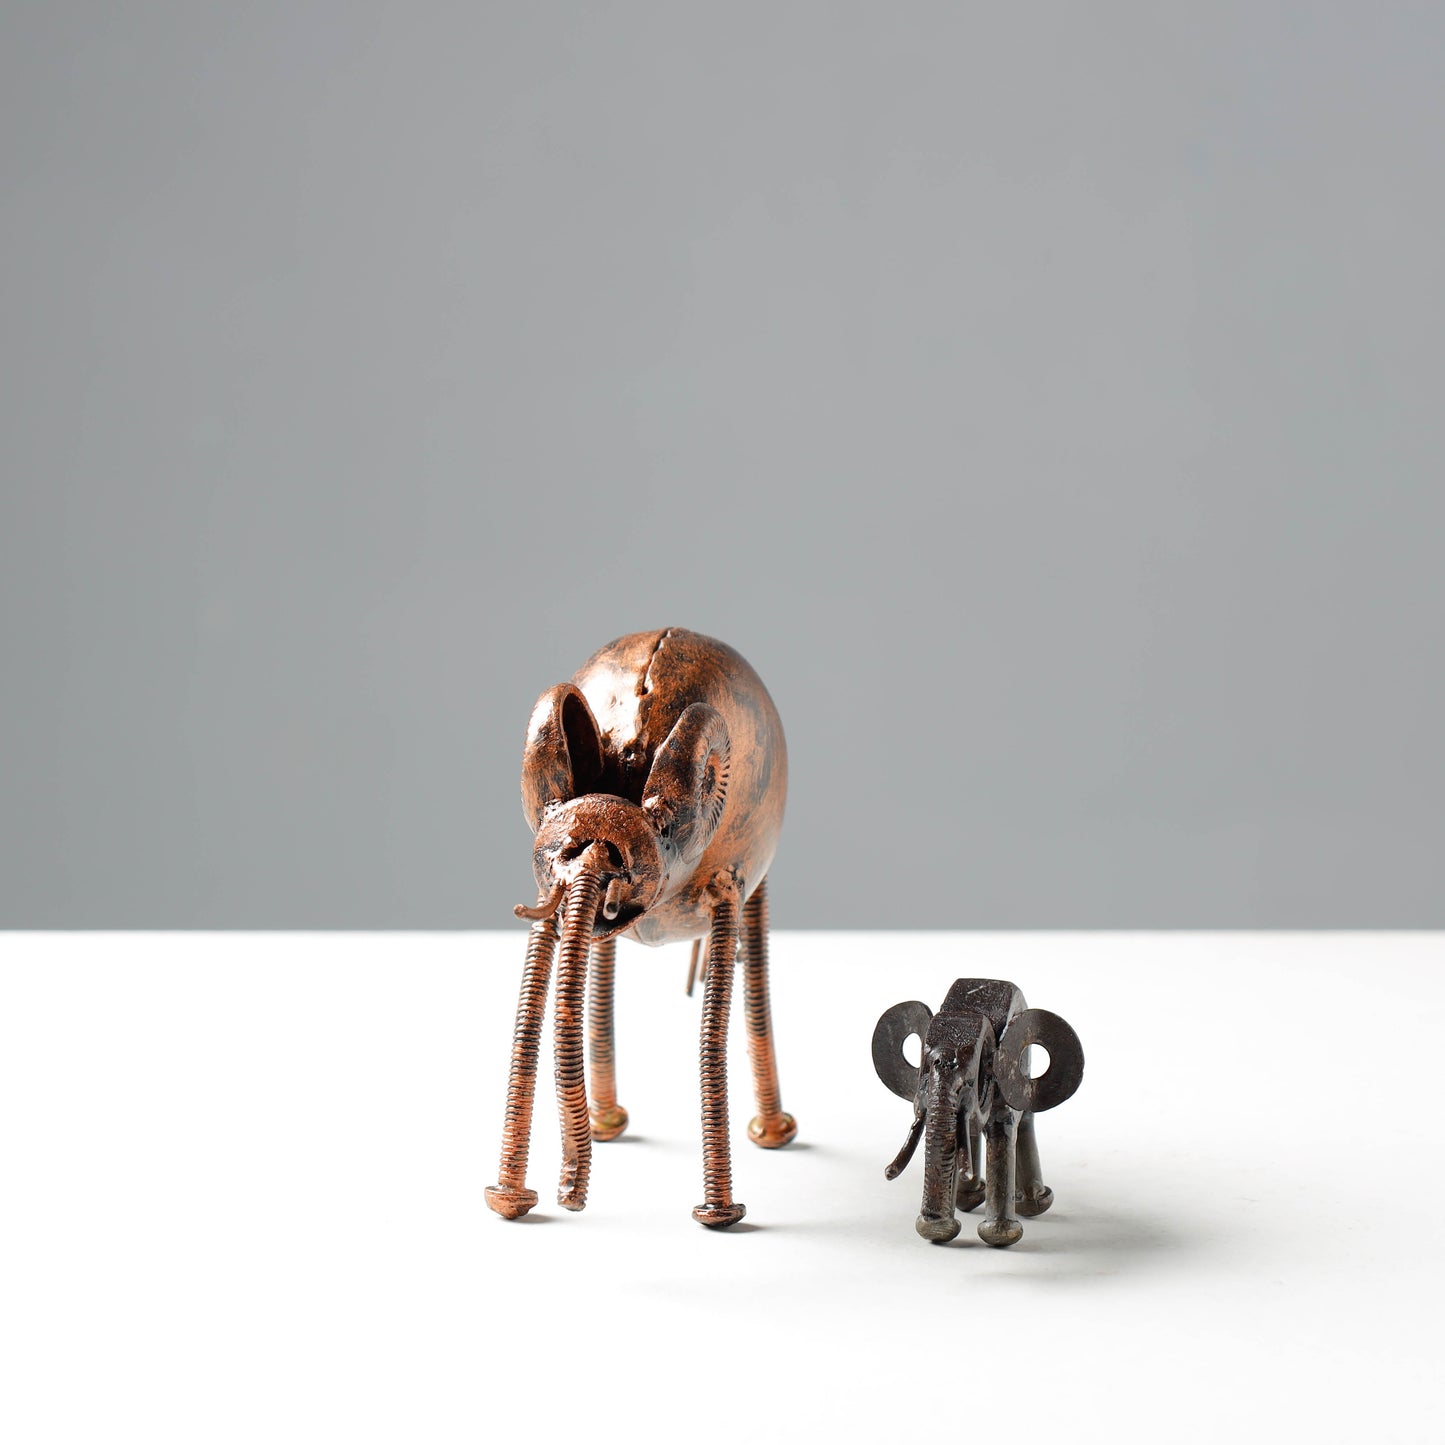 Mother Elephant with Child - Handmade Recycled Metal Sculpture by Debabrata Ruidas